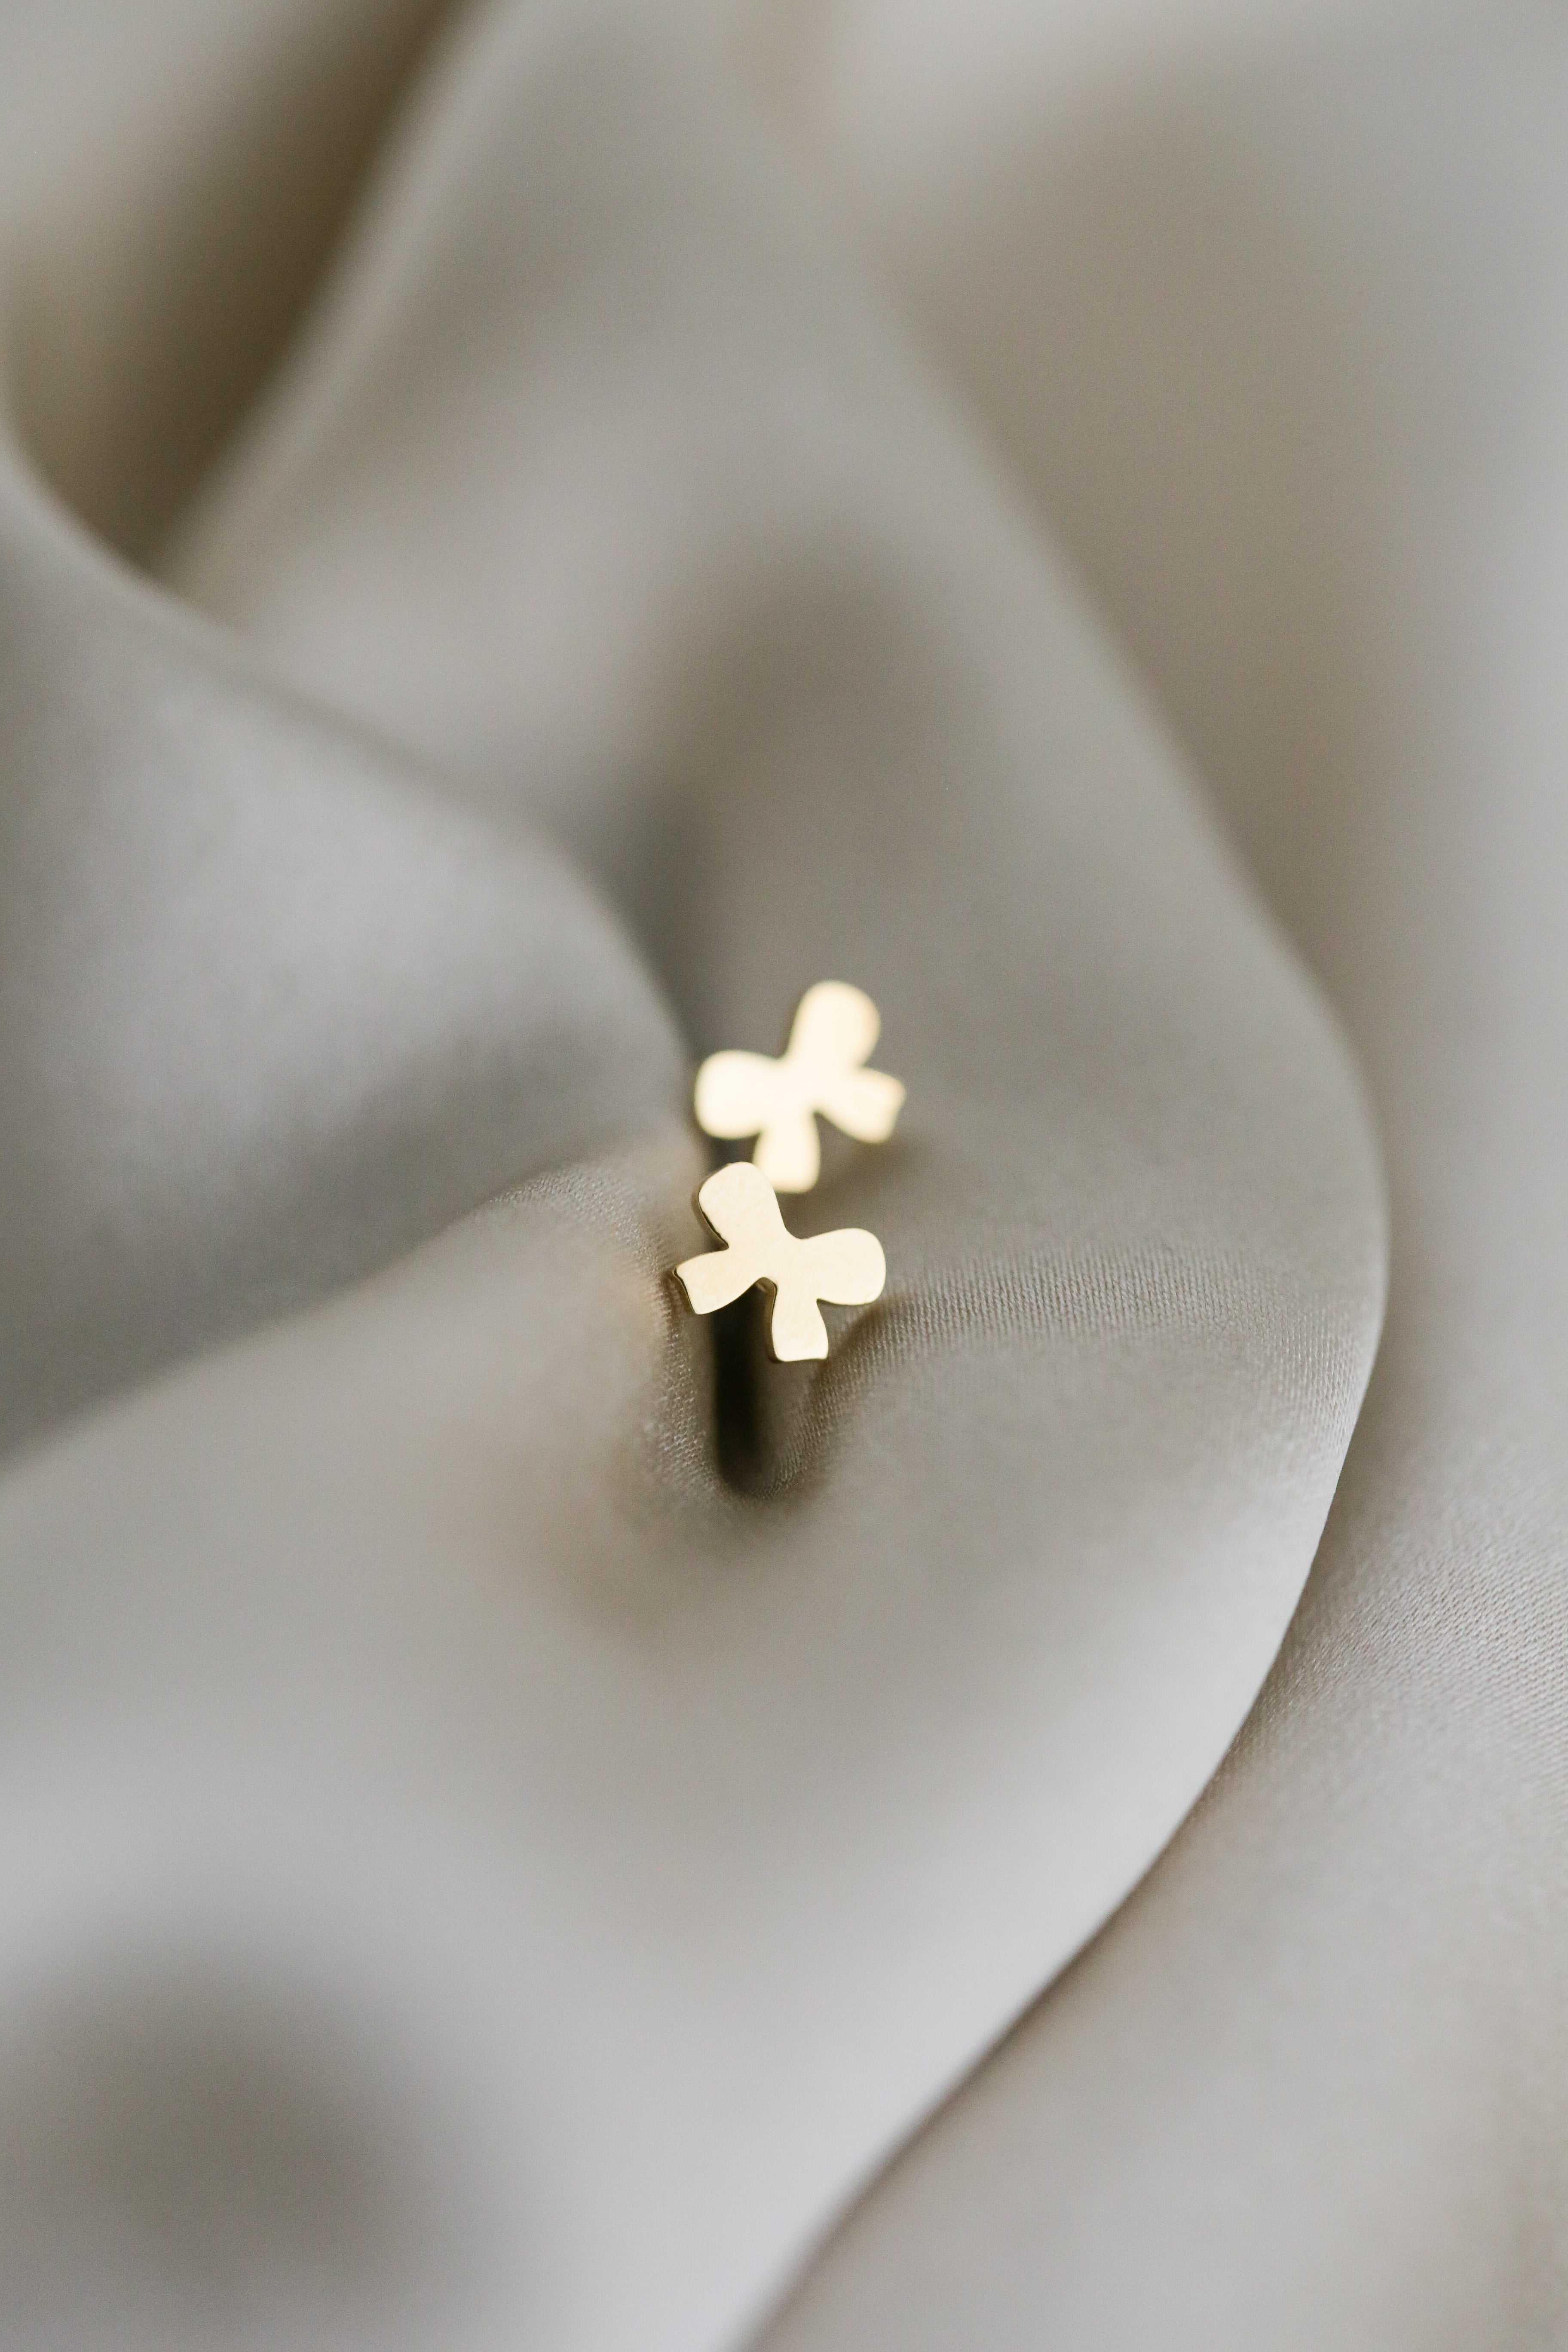 The Heart - Bow Studs - Boutique Minimaliste has waterproof, durable, elegant and vintage inspired jewelry